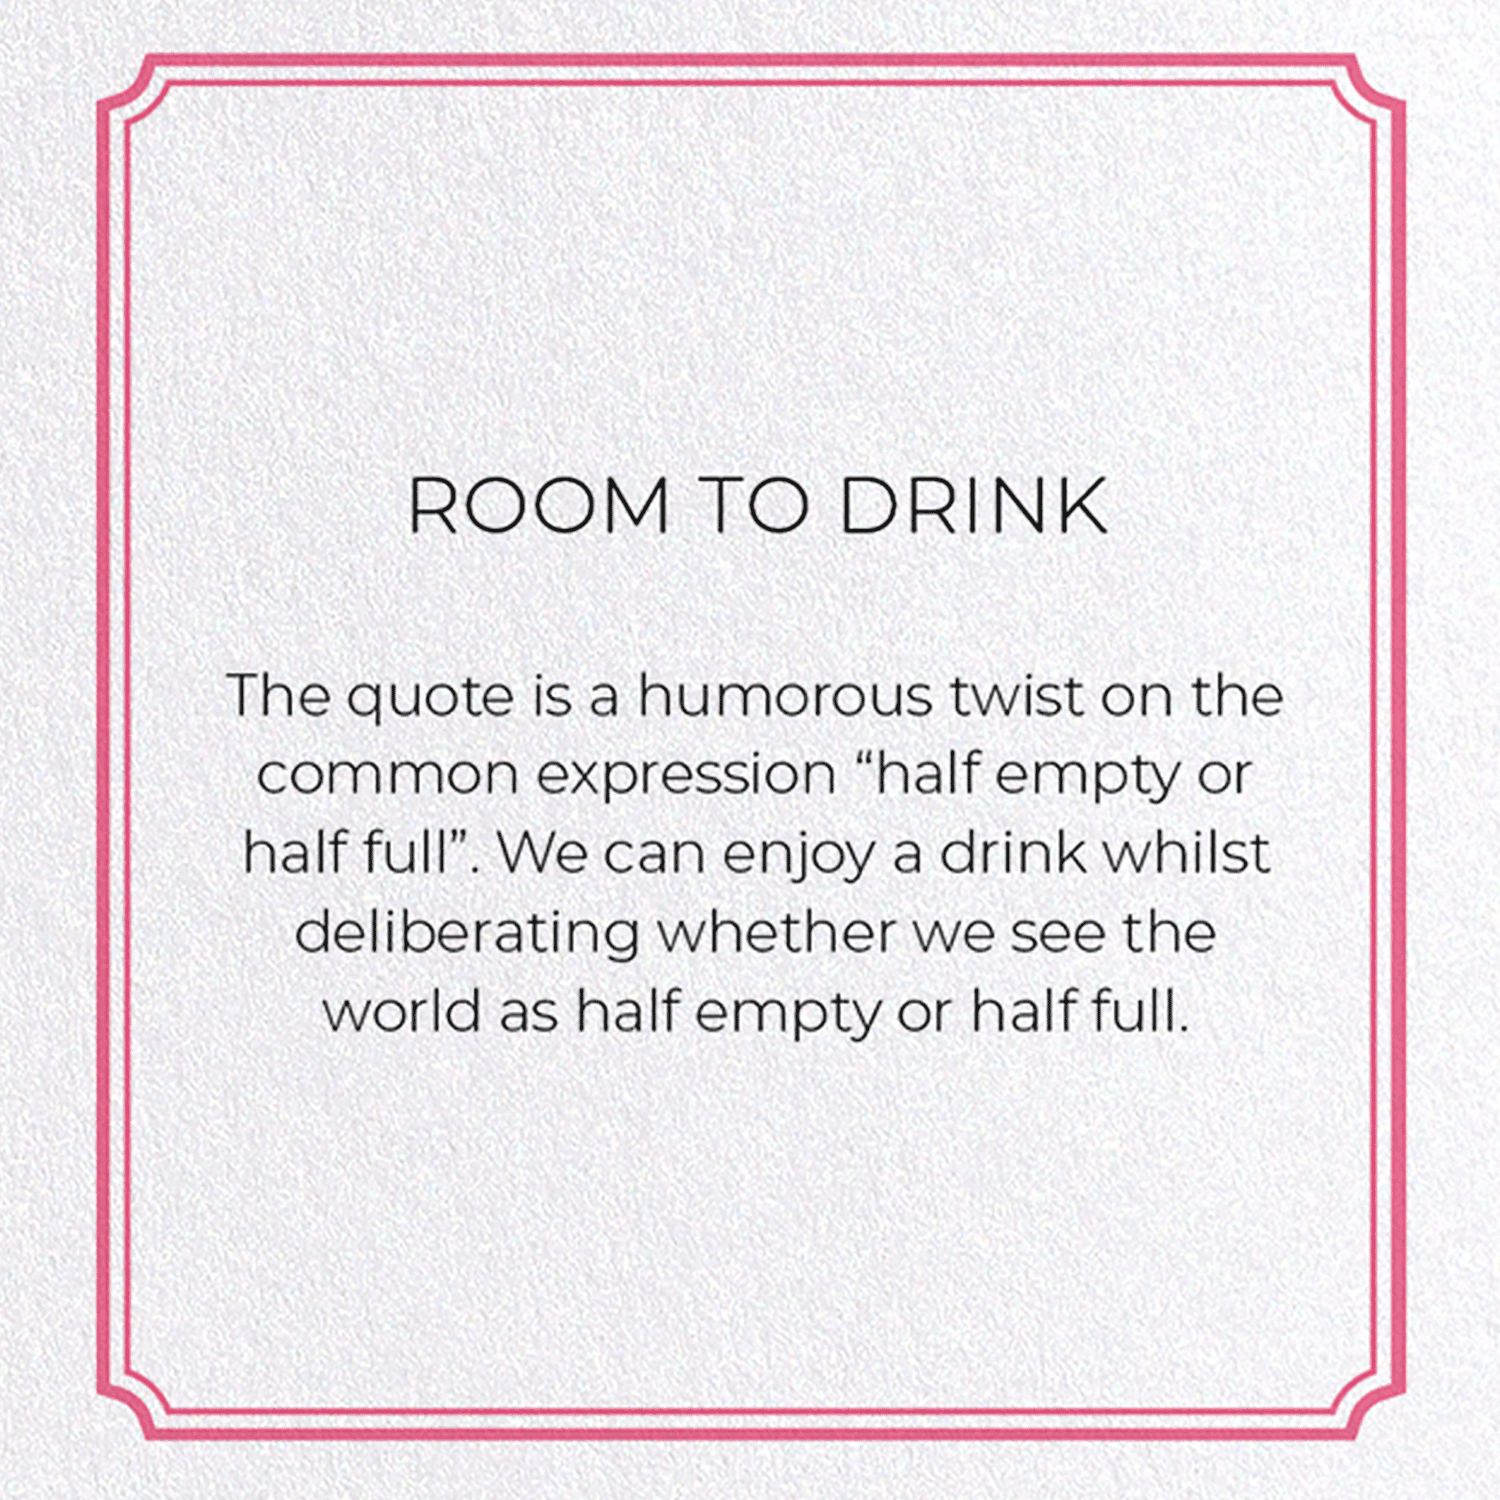 ROOM TO DRINK